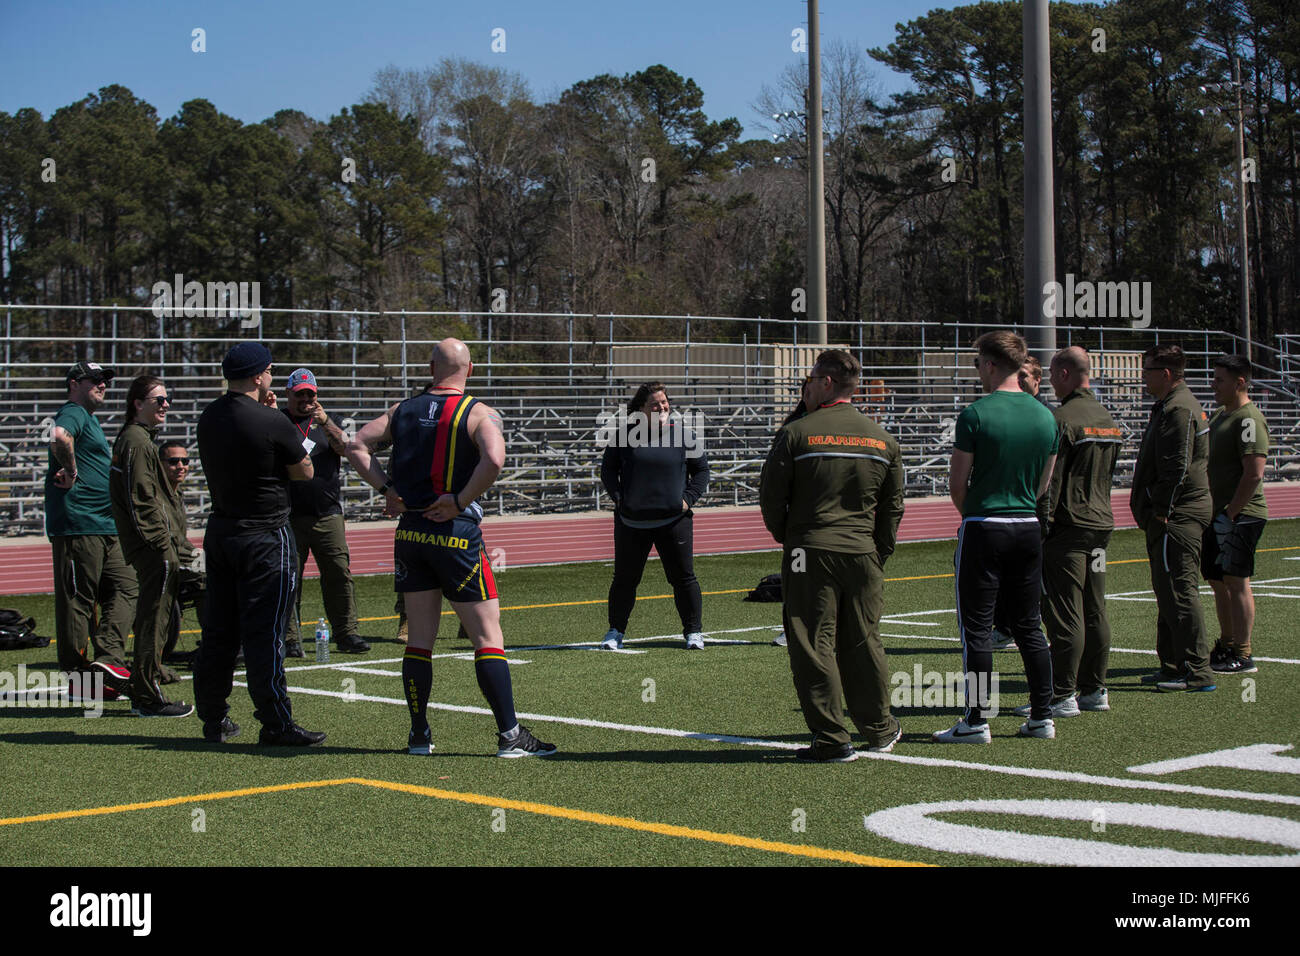 2018 Marine Corps Trials participants talk to their coach during a track practice at Marine Corps Base Camp Lejeune, N.C., March 15, 2018. The Marine Corps Trials promotes recovery and rehabilitation through adaptive sport participation and develops camaraderie among recovering service members (RSMs) and veterans. It is an opportunity for RSMs to demonstrate their achievements and serves as the primary venue to select Marine Corps participants for the DoD Warrior Games. (U.S. Marine Corps Stock Photo